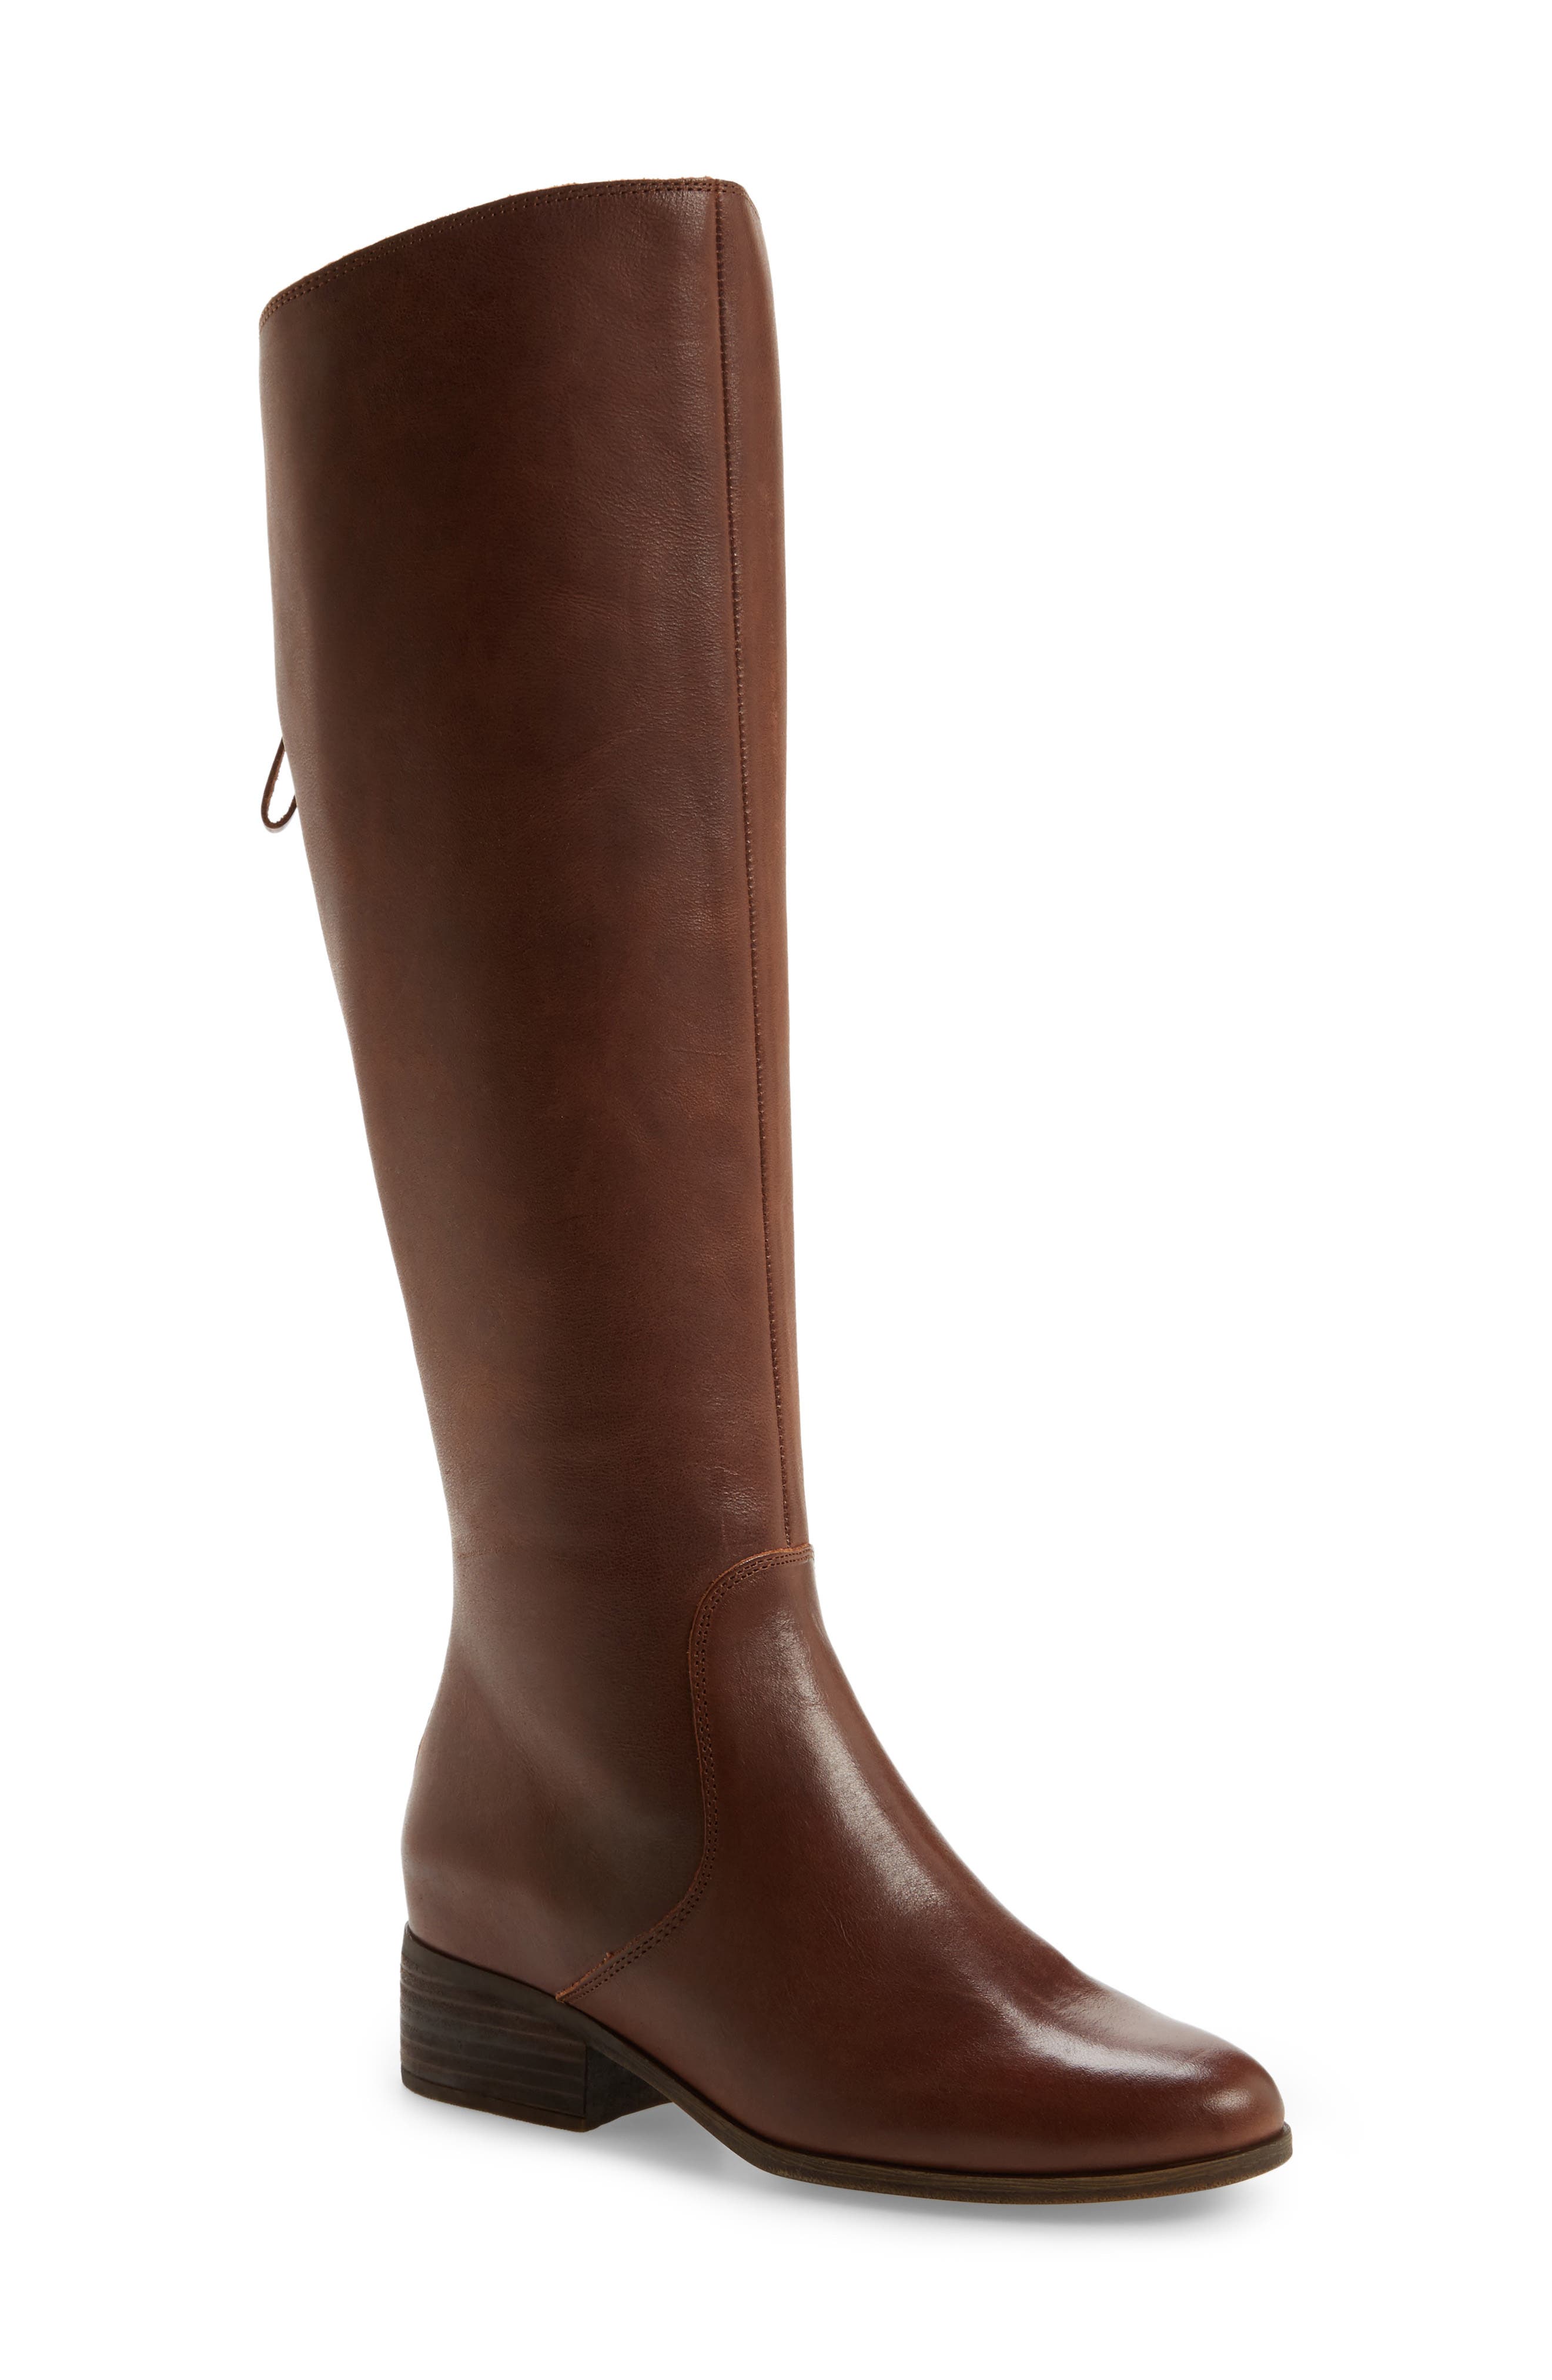 lucky brand over the knee boots